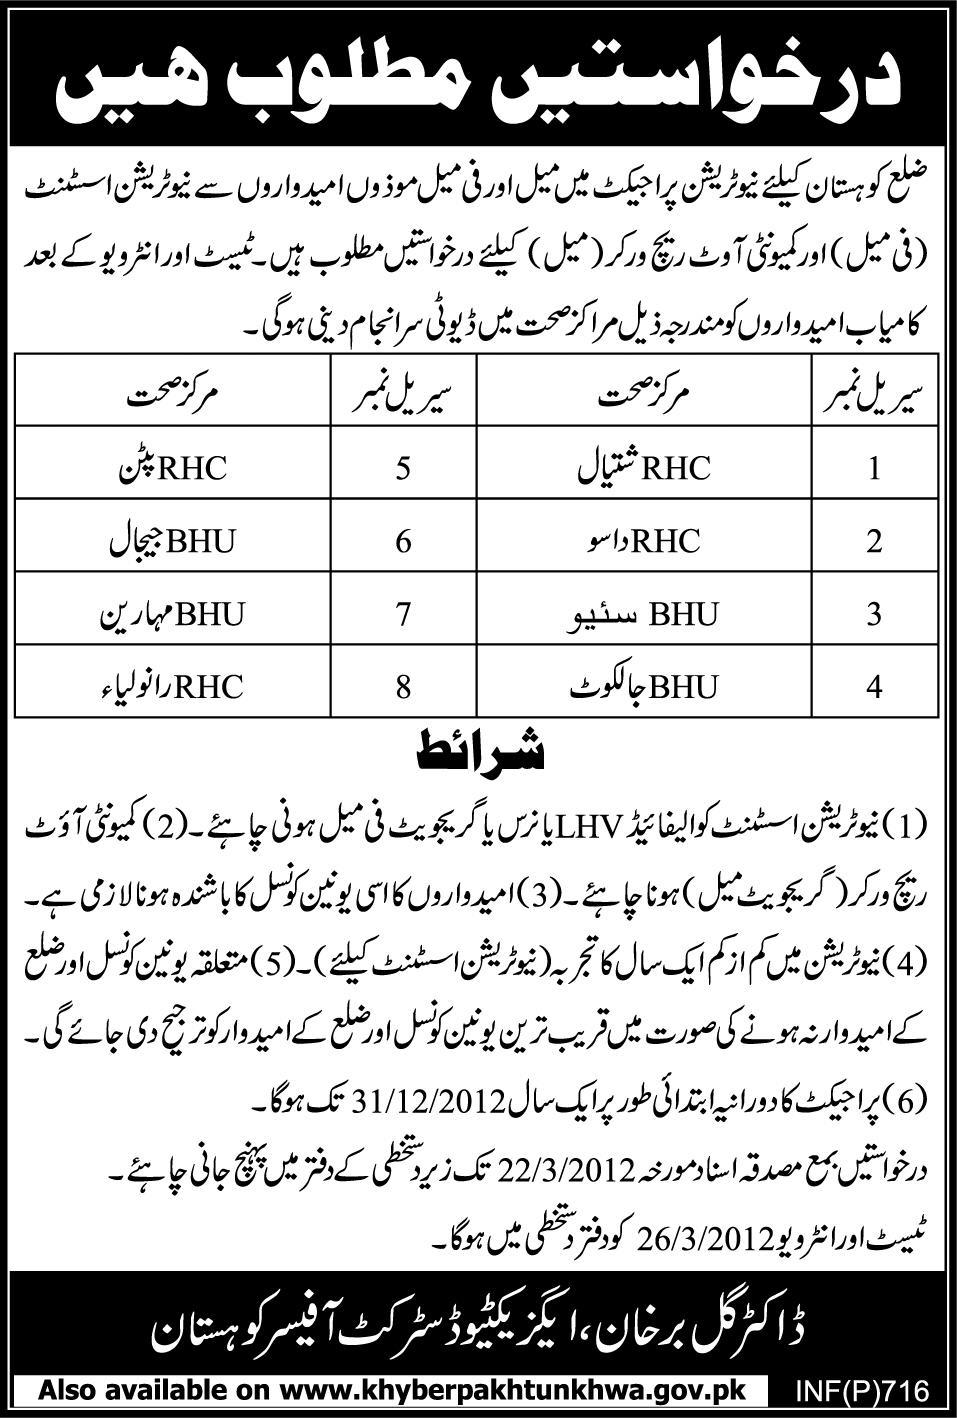 Nutrition Project, District Kohistan (Govt Jobs) Requires Nutrition Assistants and Community Outreach Workers